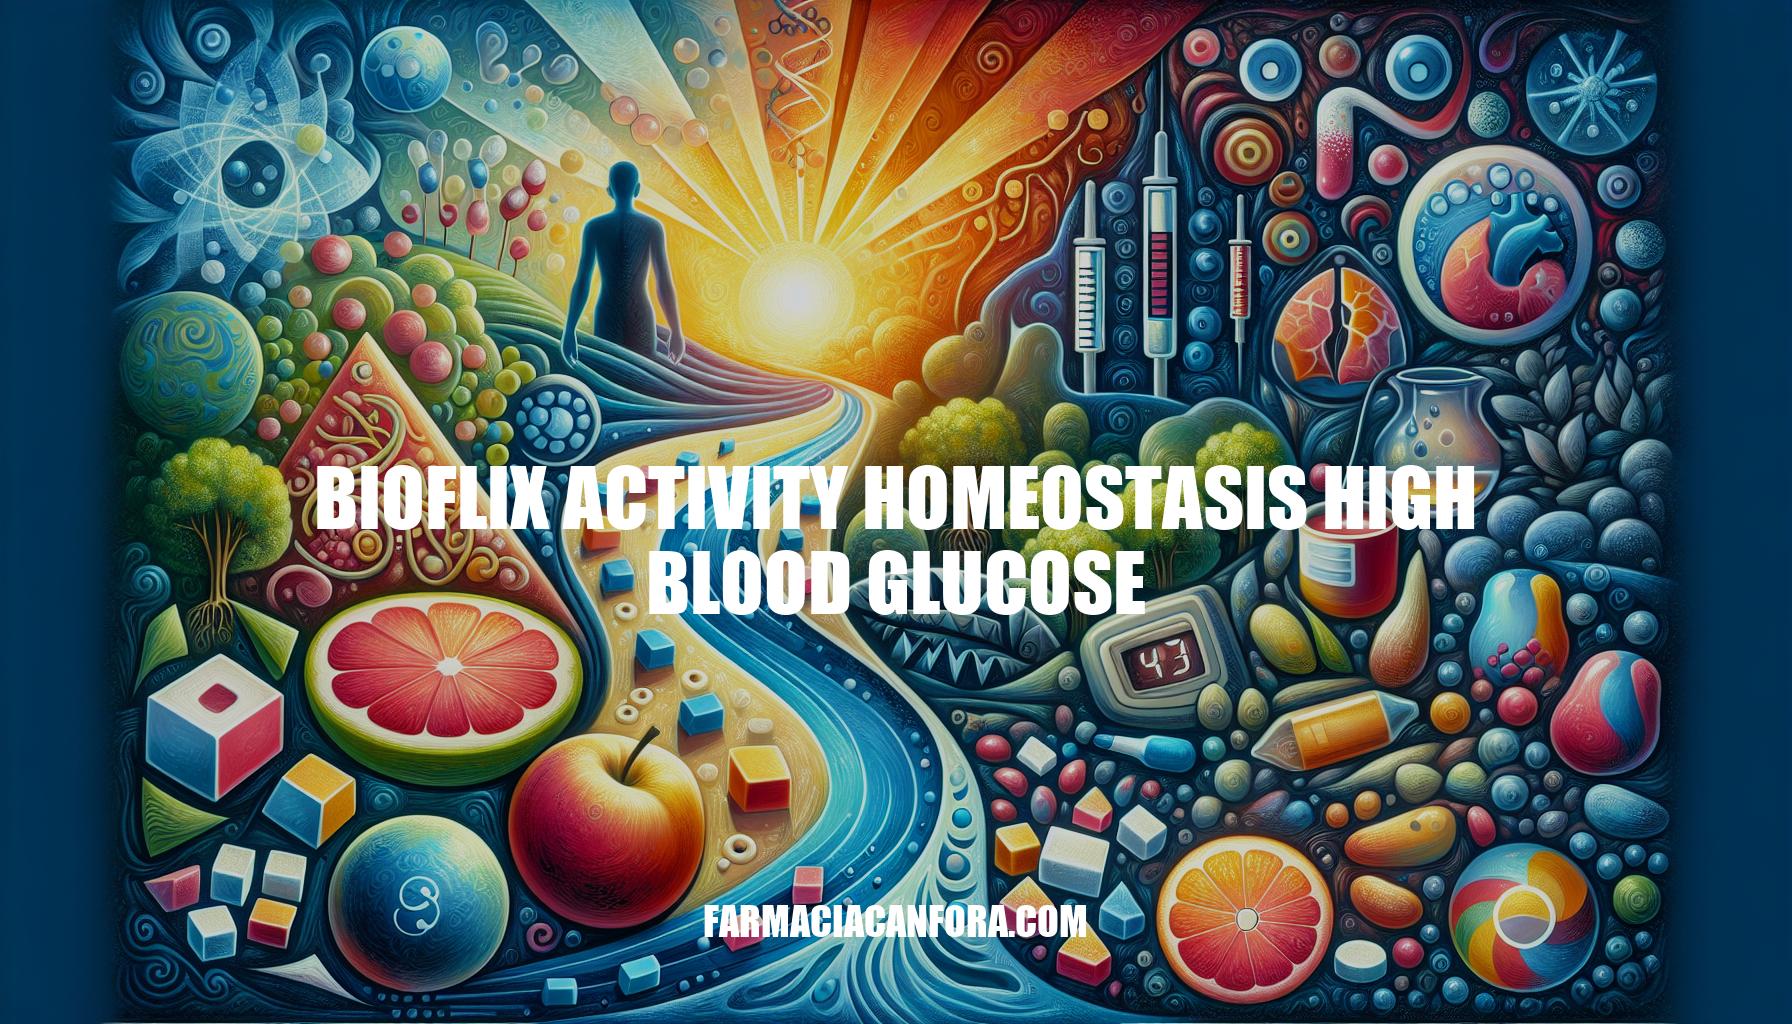 Managing High Blood Glucose Levels with Bioflix Activity Homeostasis